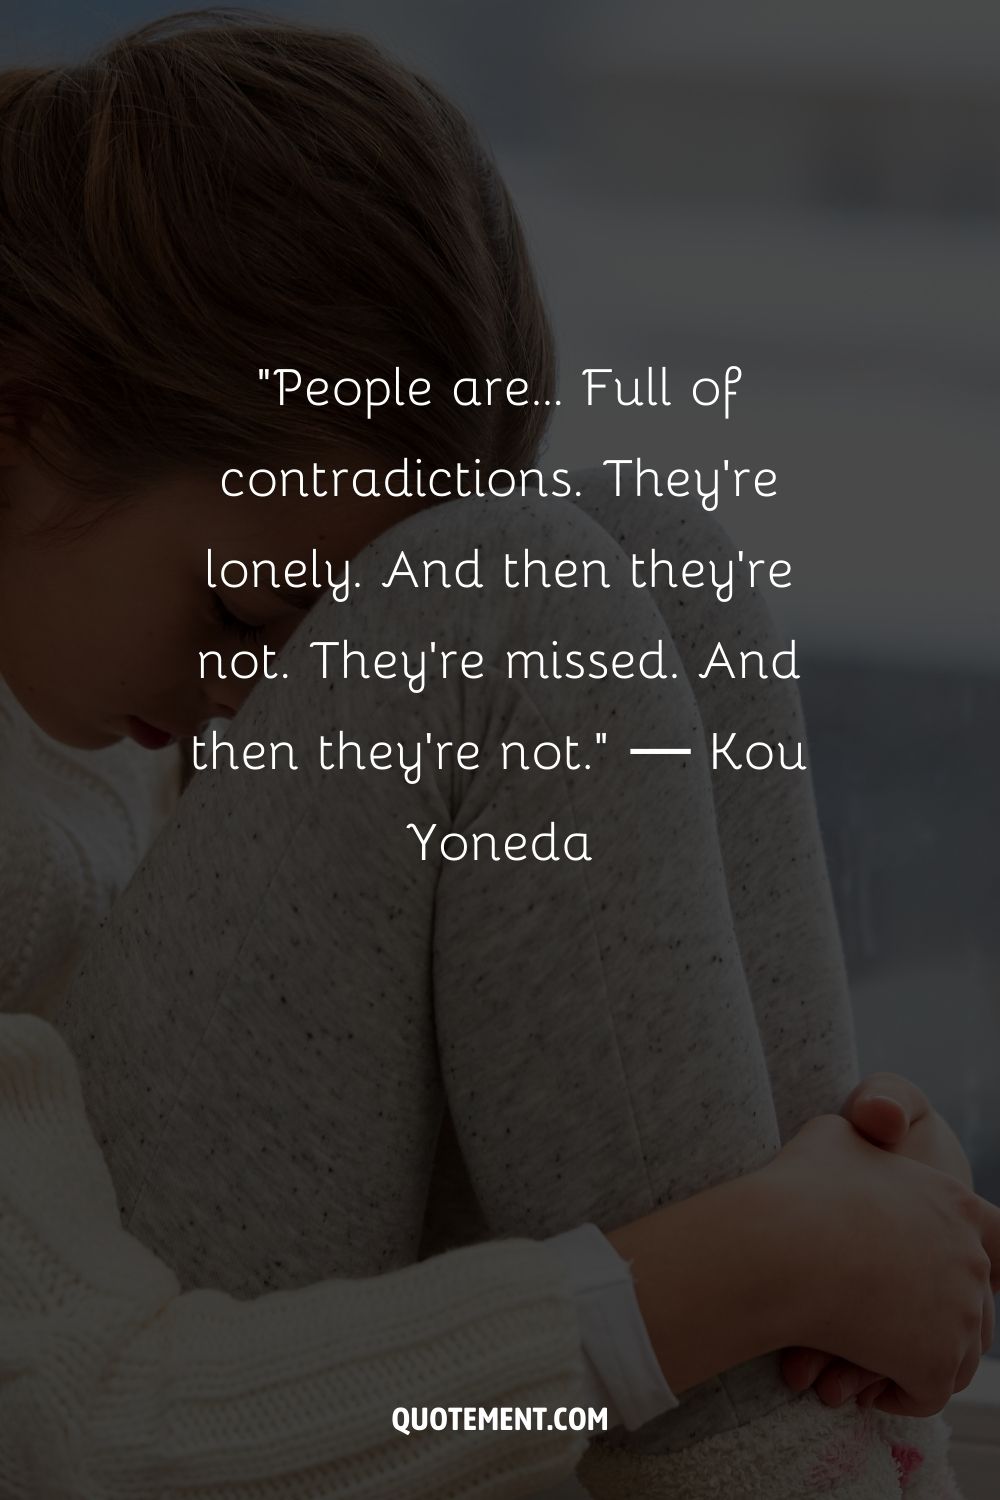 People are... Full of contradictions. They're lonely. And then they're not. They're missed. And then they're not